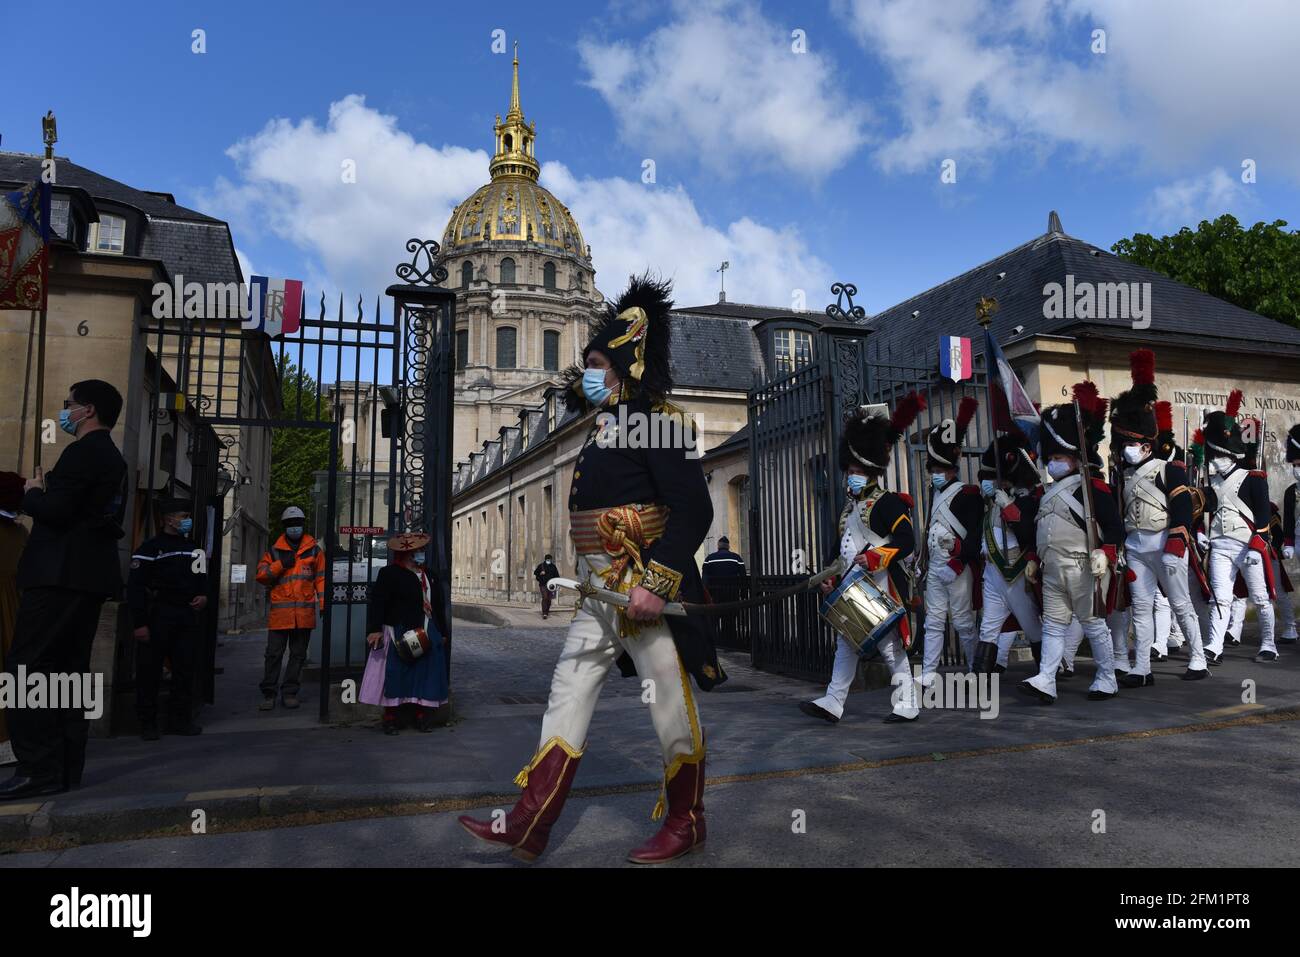 *** STRICTLY NO SALES TO FRENCH MEDIA OR PUBLISHERS - RIGHTS RESERVED ***May 05, 2021 - Paris, France: Reenactors dressed as soldiers of Napoleon's Grande Armee gather in front of the Invalides church, where the French emperor's tomb is located, to mark the bicentenary of his death. Stock Photo